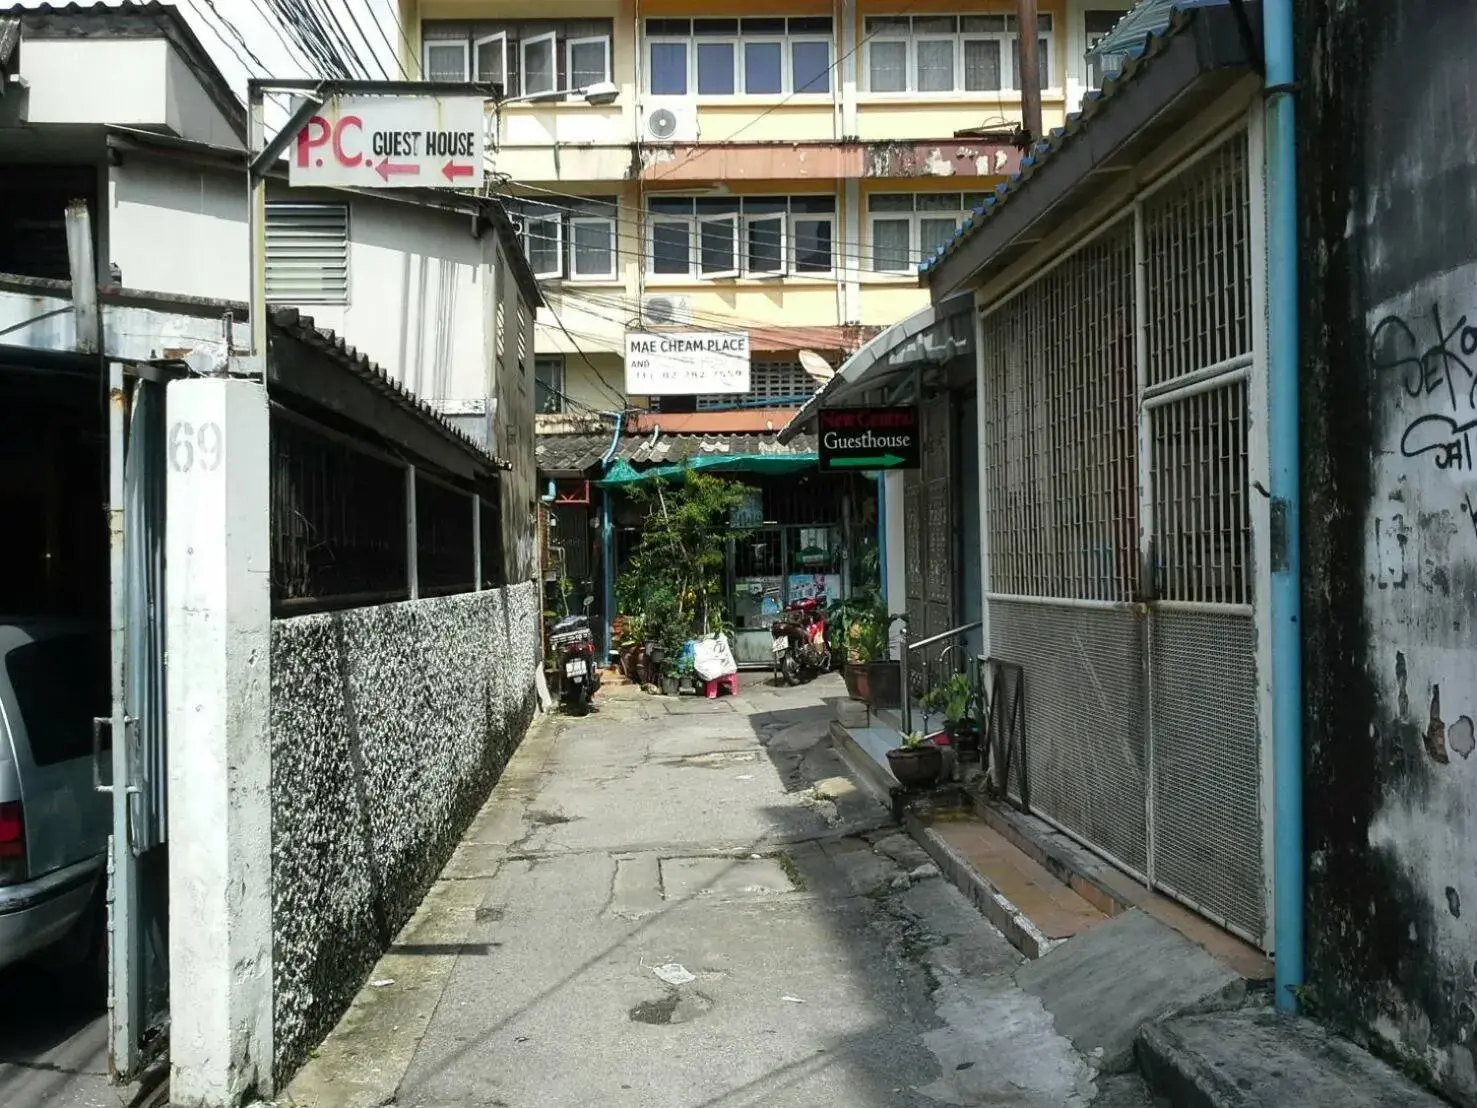 Property building in New Central Guesthouse